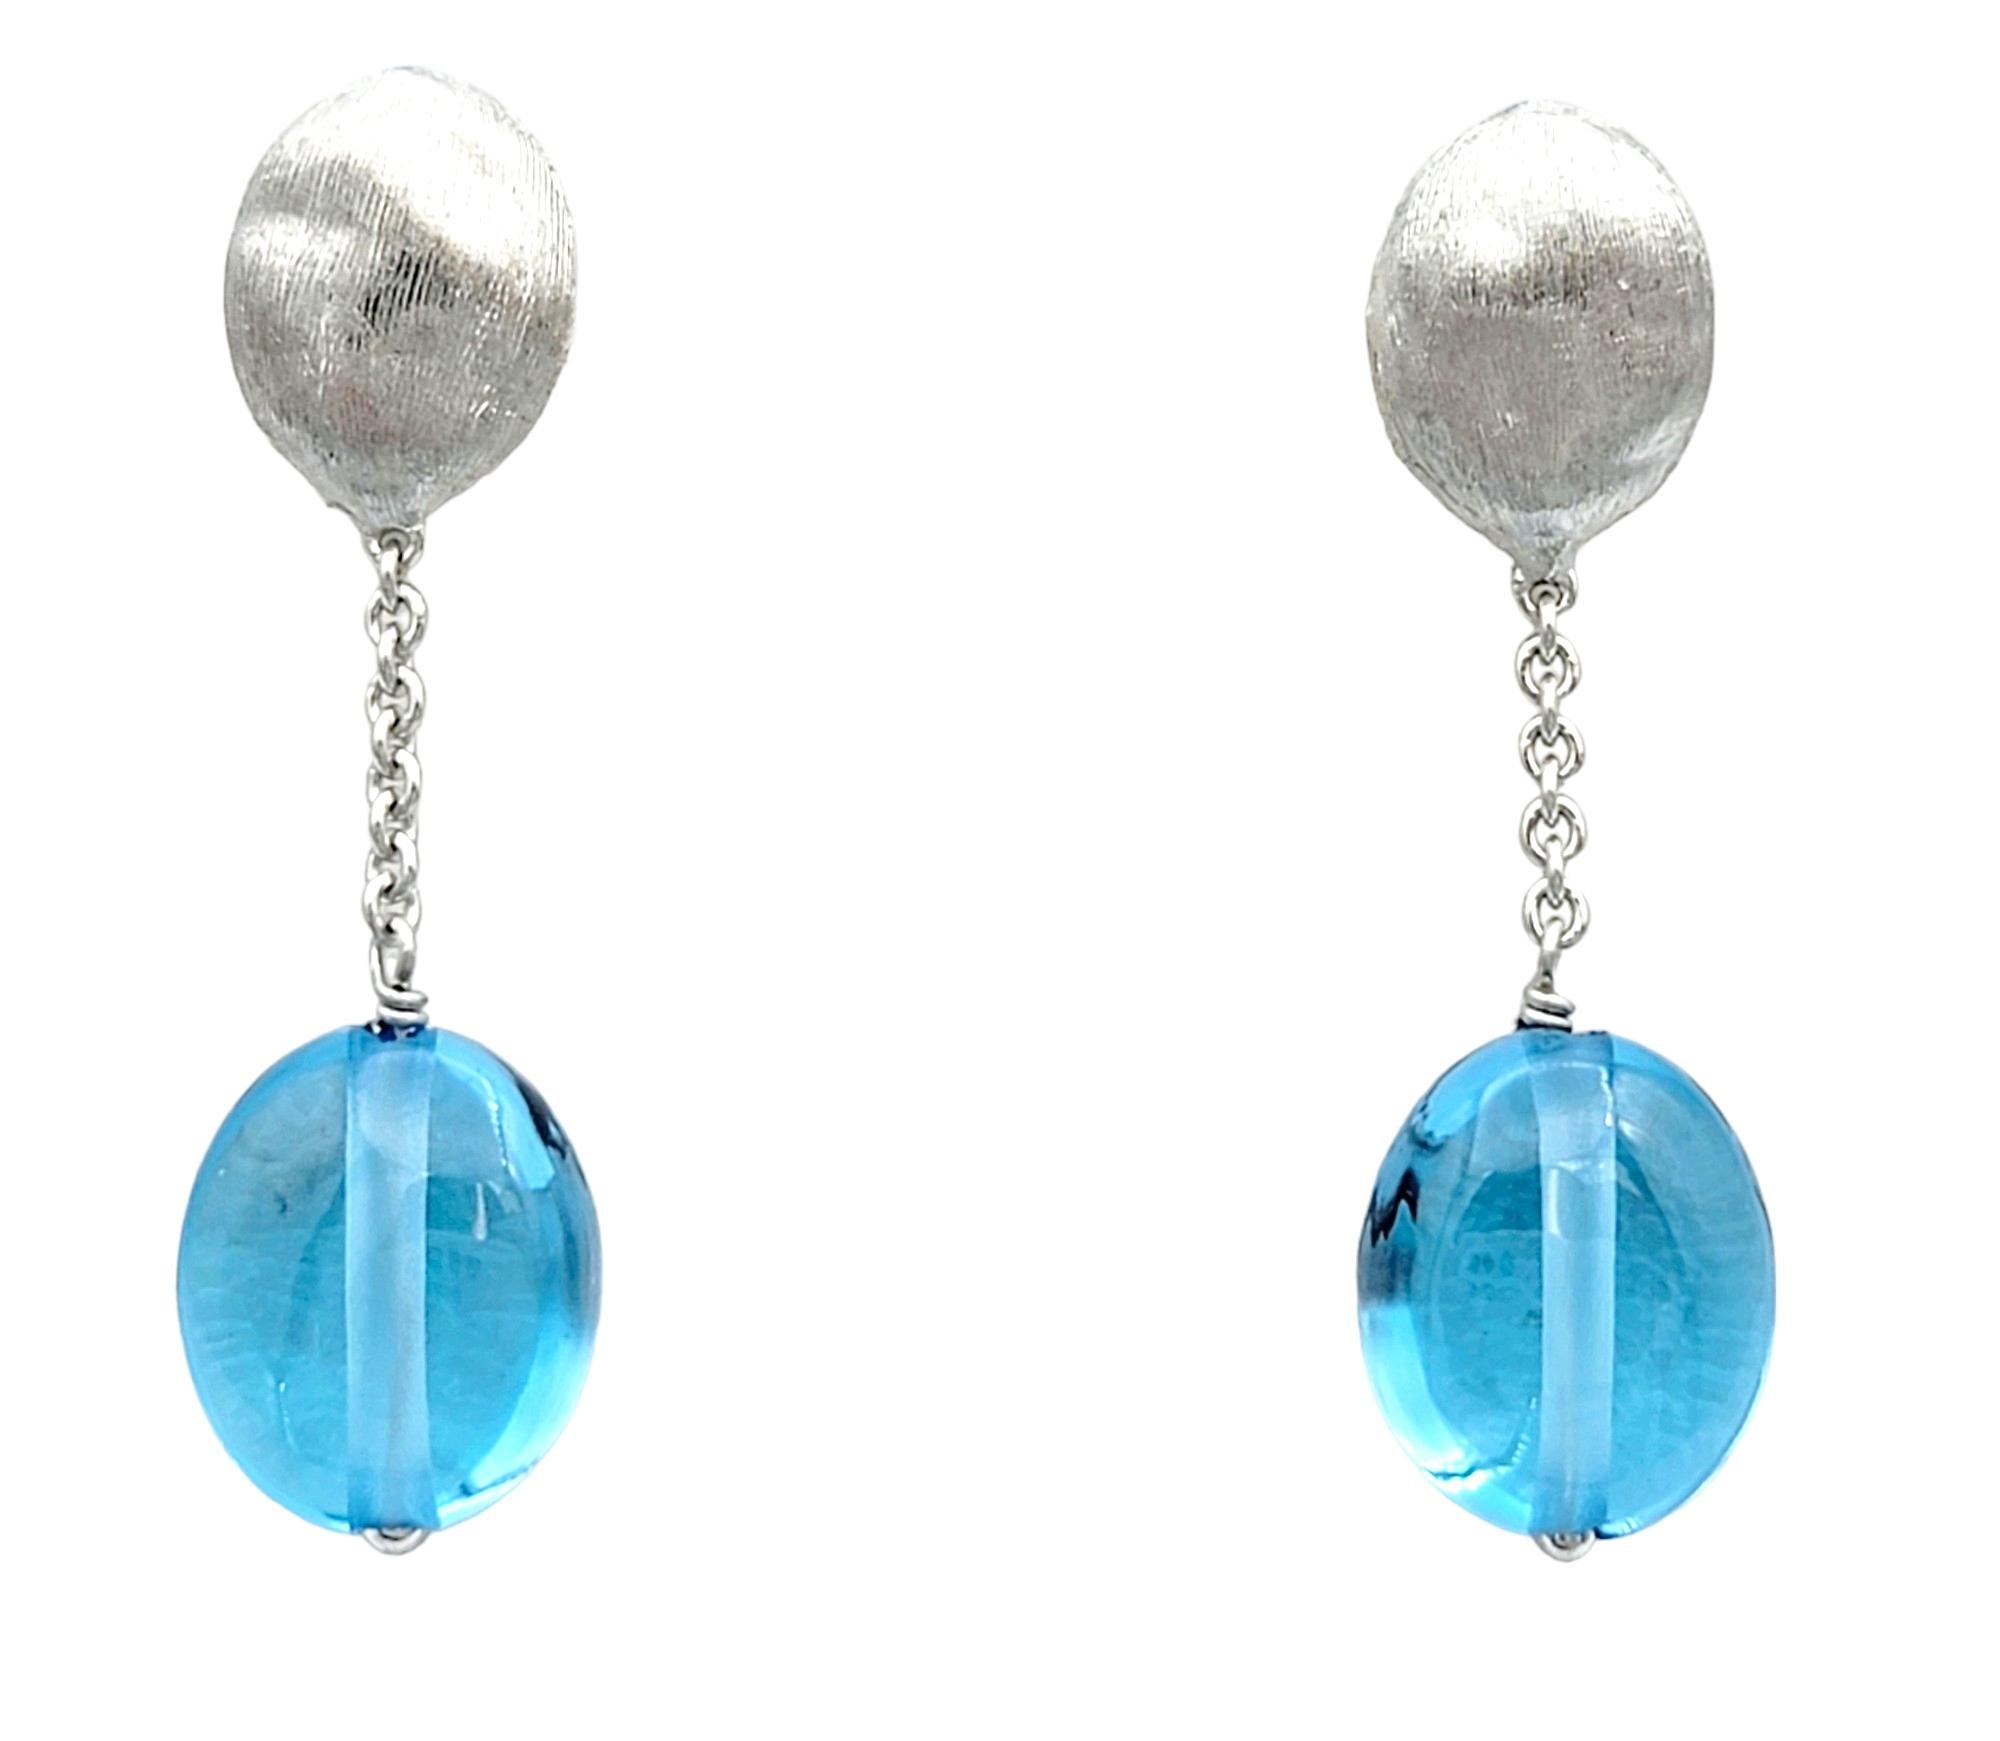 This gorgeous pair of Marco Bicego Siviglia blue topaz dangle earrings are a stunning display of elegance and sophistication, crafted with meticulous attention to detail in luxurious 18 karat white gold. Each earring features a captivating cabochon